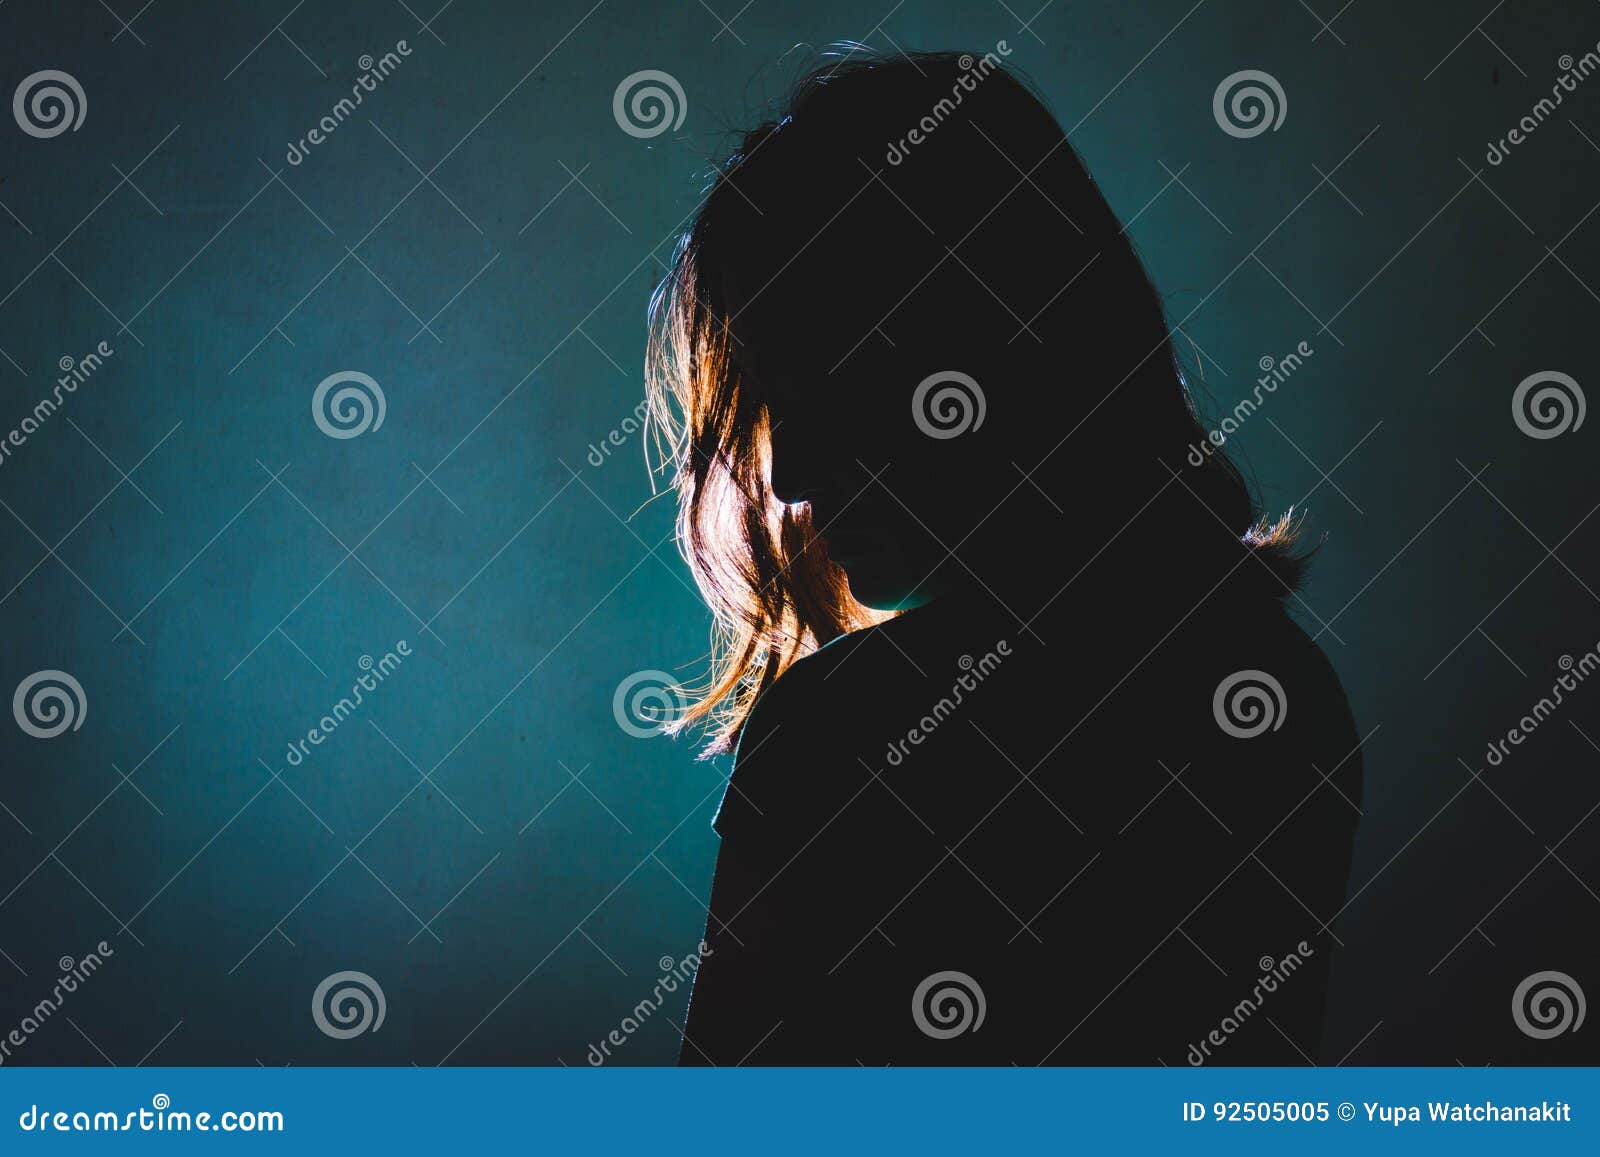 silhouette of depress woman standing in the dark with light shin